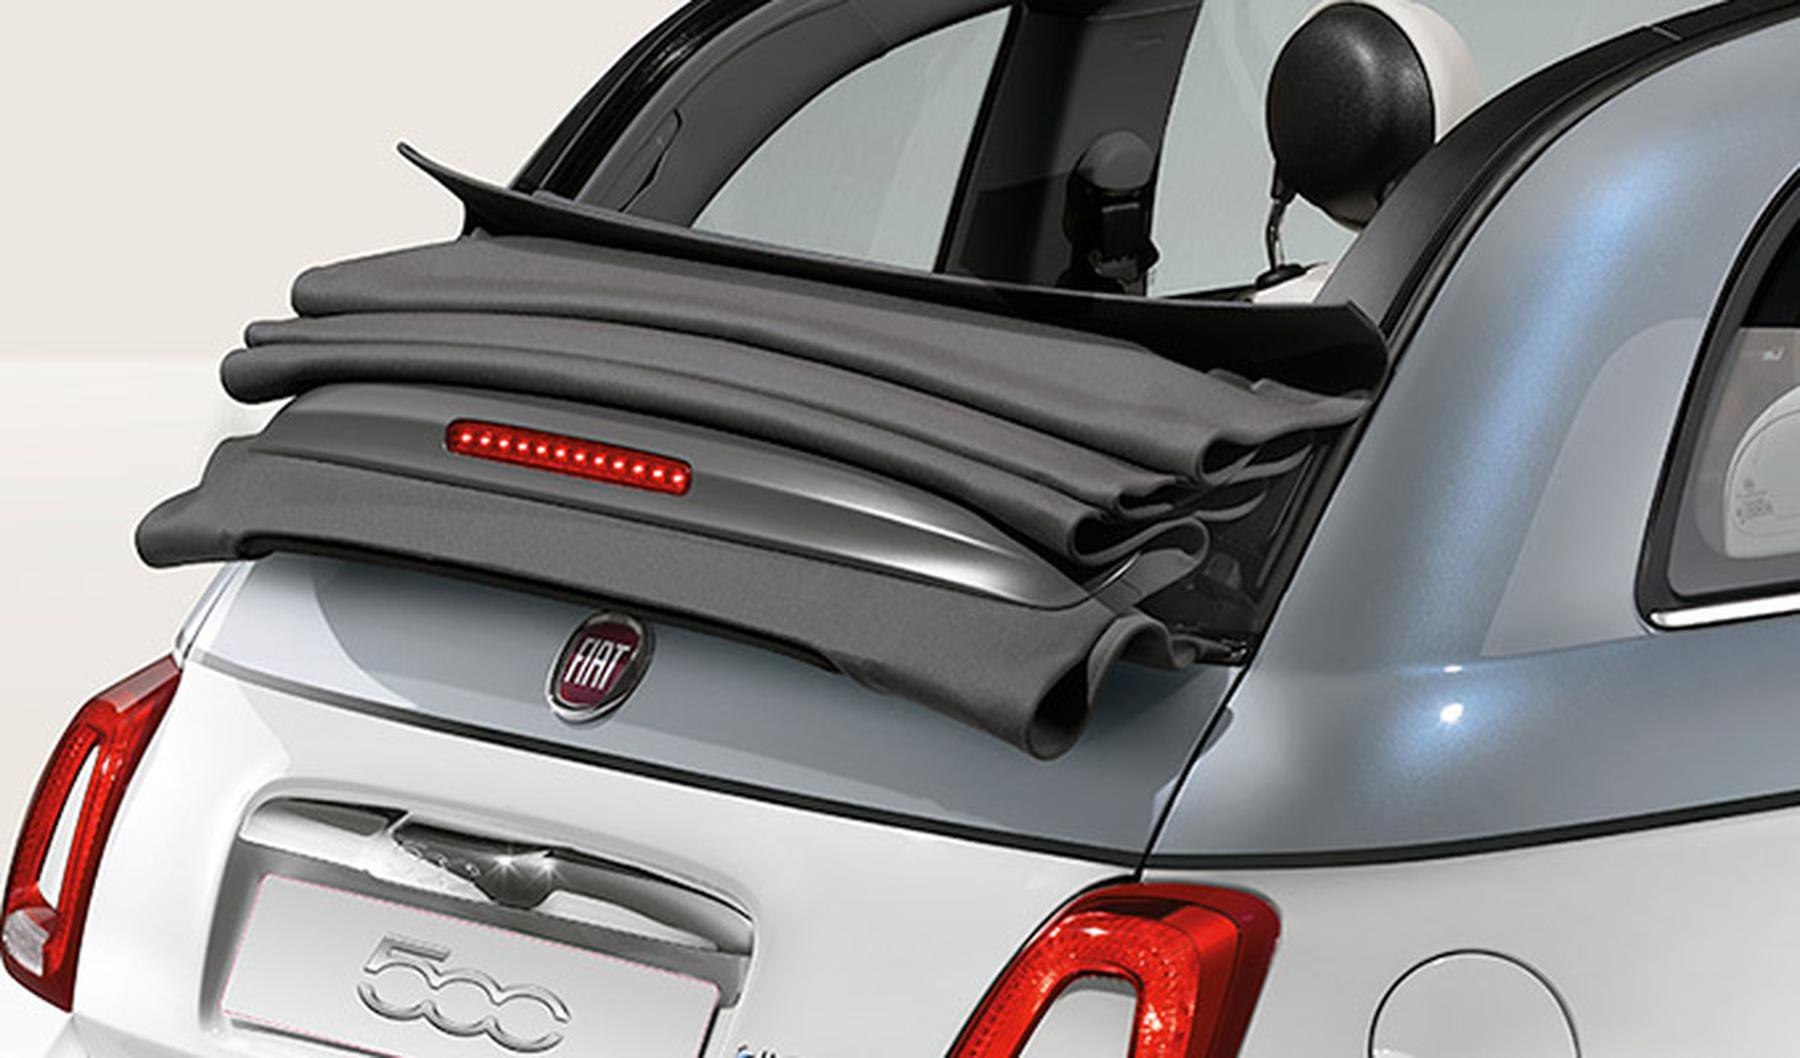 The refreshed Fiat 500 Dolcevita Cabriolet